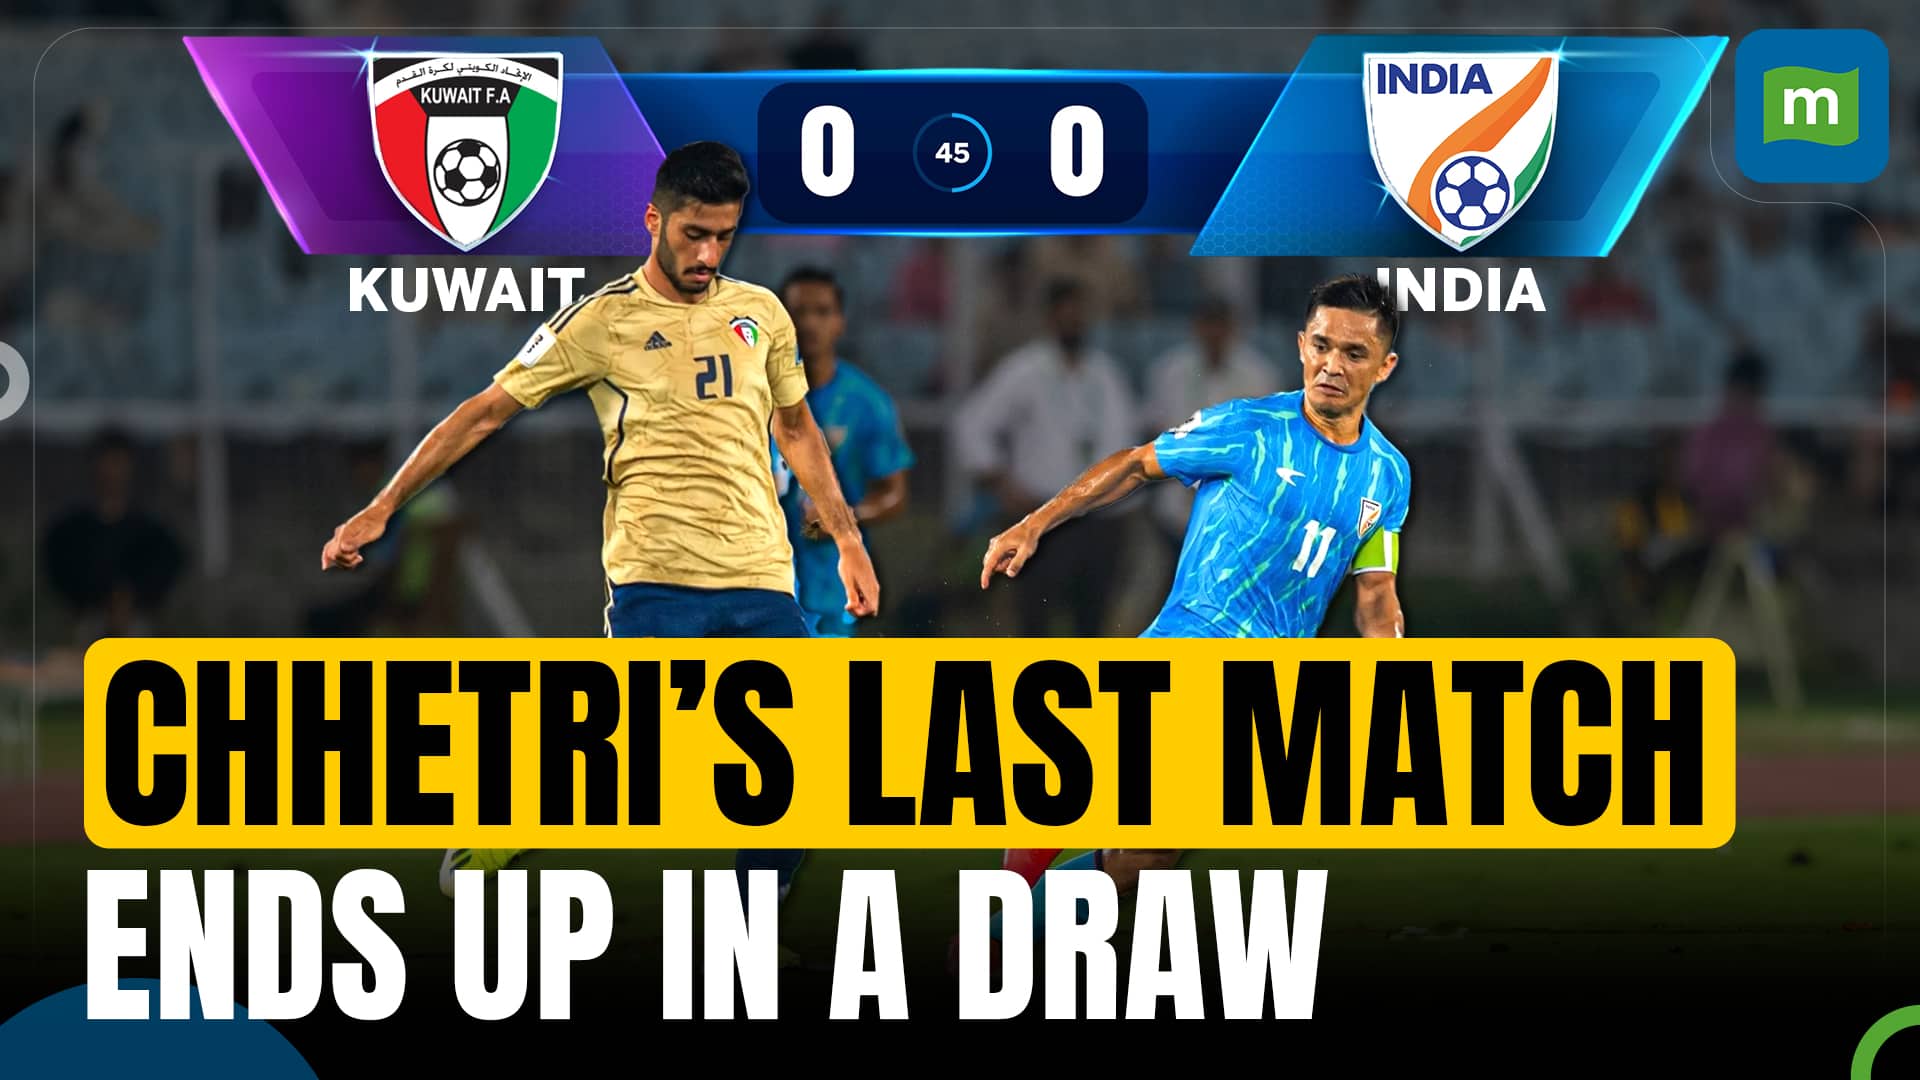 India and Kuwait end in a draw in Chhetri's farewell game at Salt lake stadium